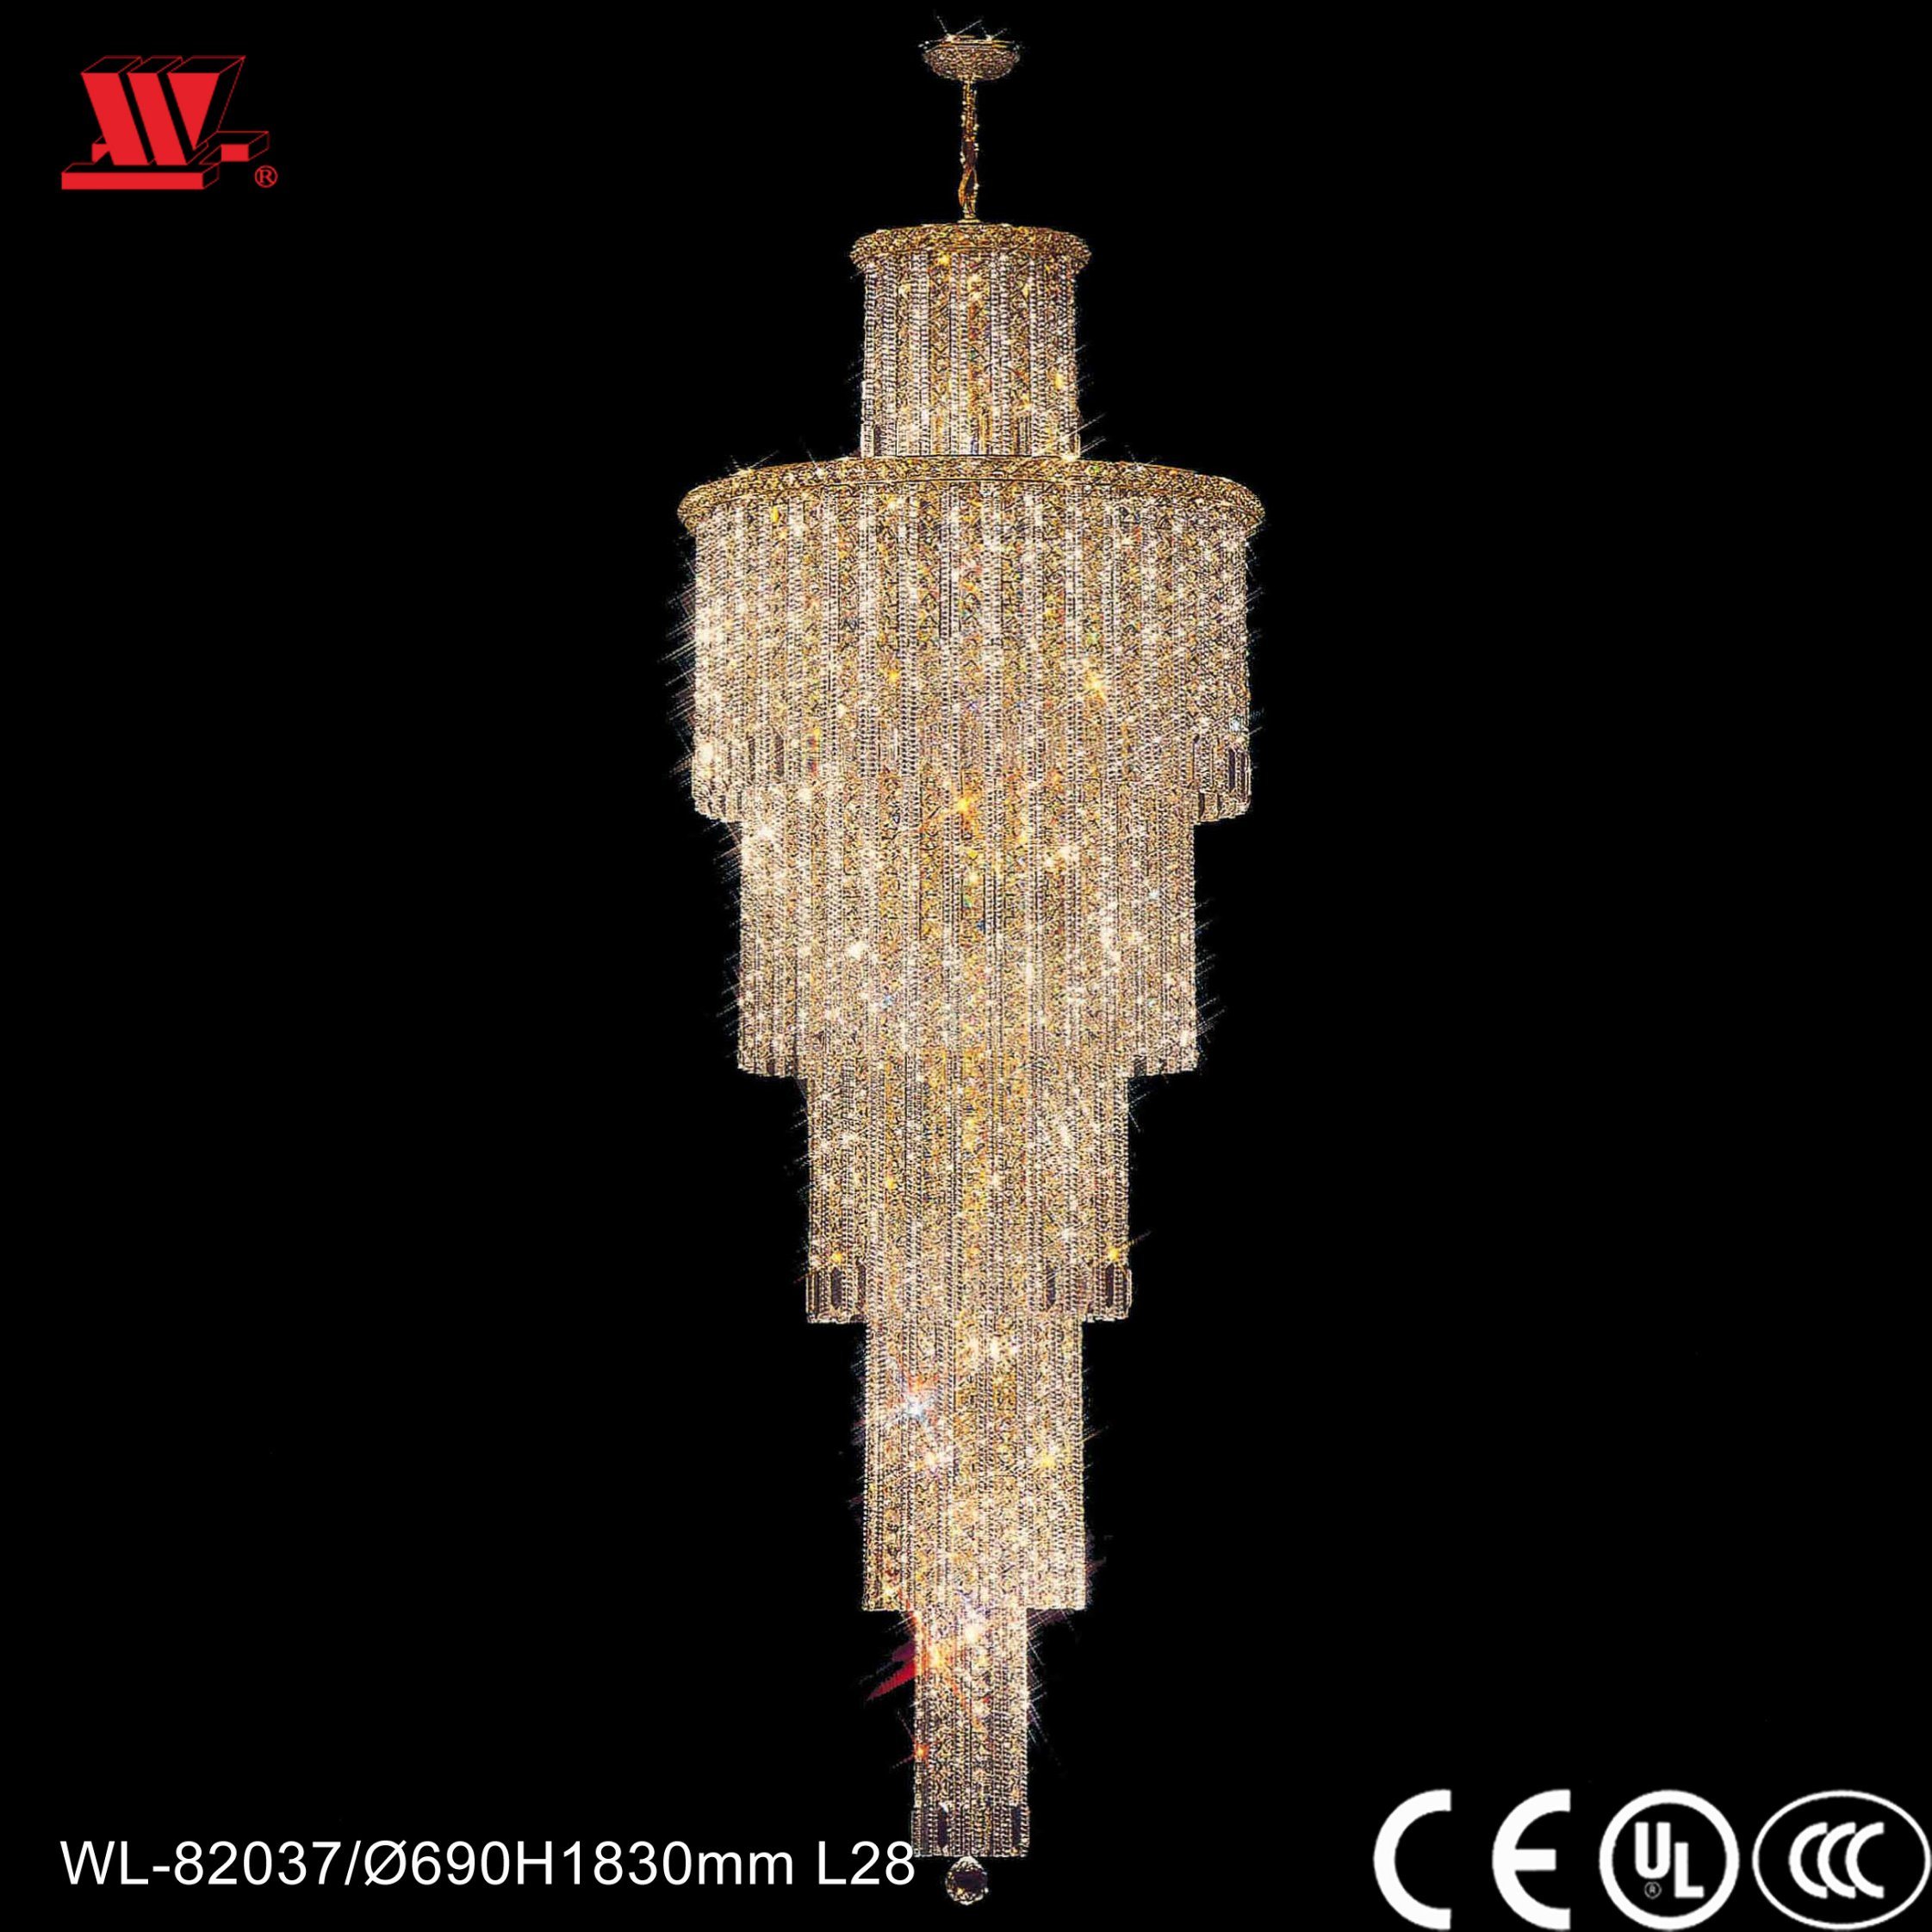 Crystal Chandelier with Glass Chains Wl-82037